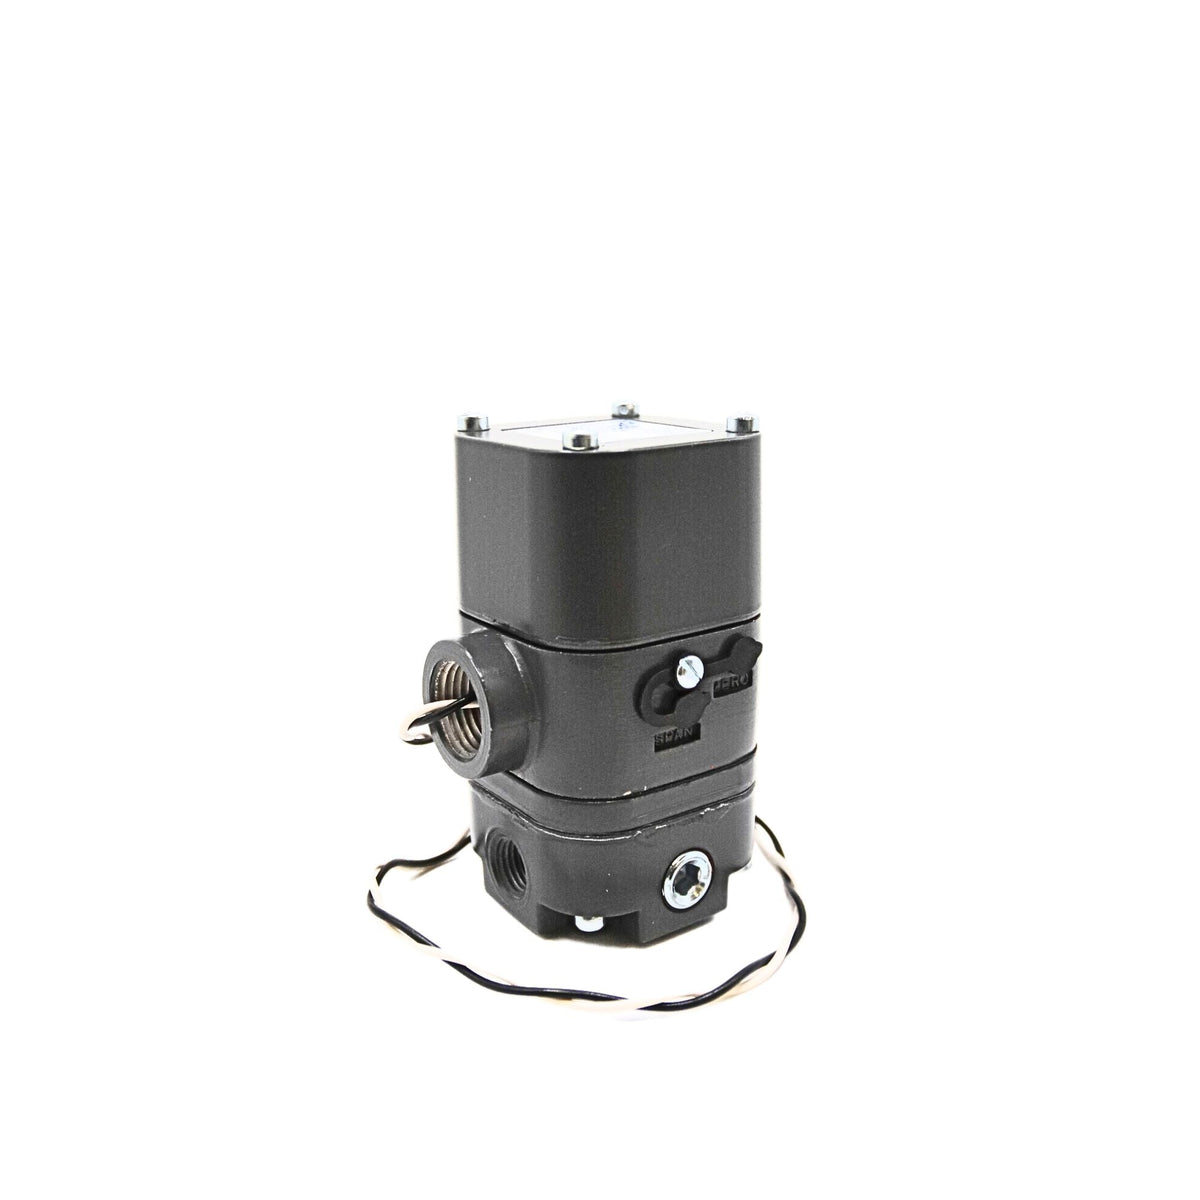    Control Air l Transducer I/P E/P 4-20MA, 3-15PSI | 500-AC used on control air product line - side view